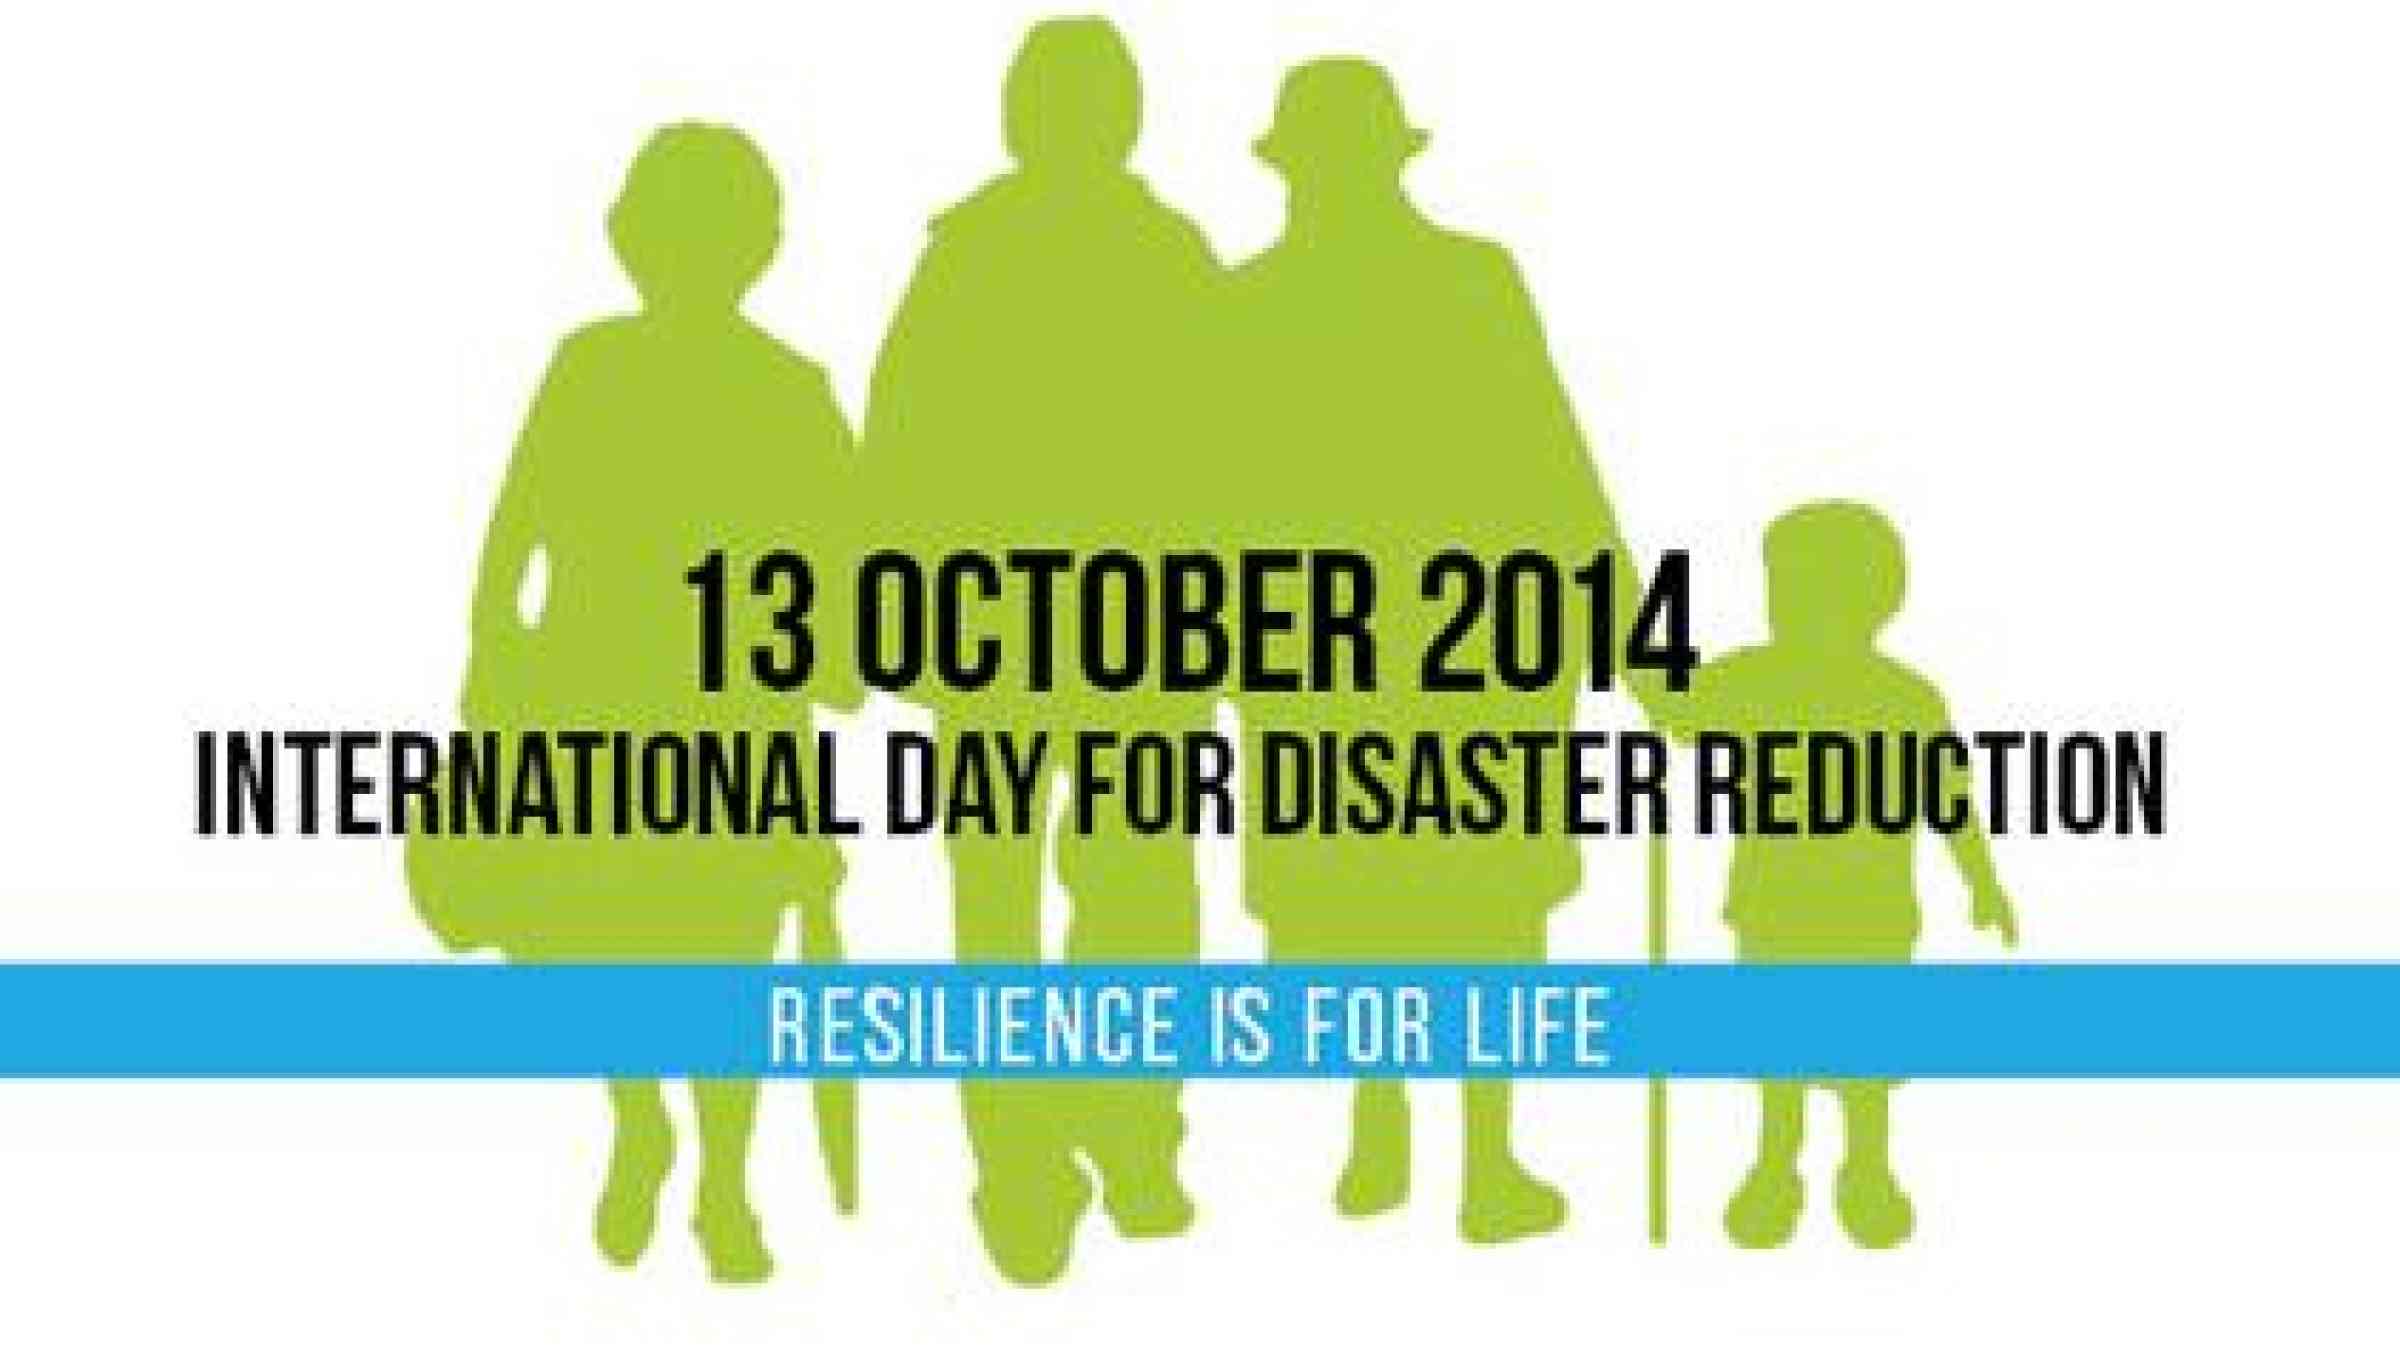 This year's IDDR celebration calls for greater involvement of older persons in disaster management worldwide.